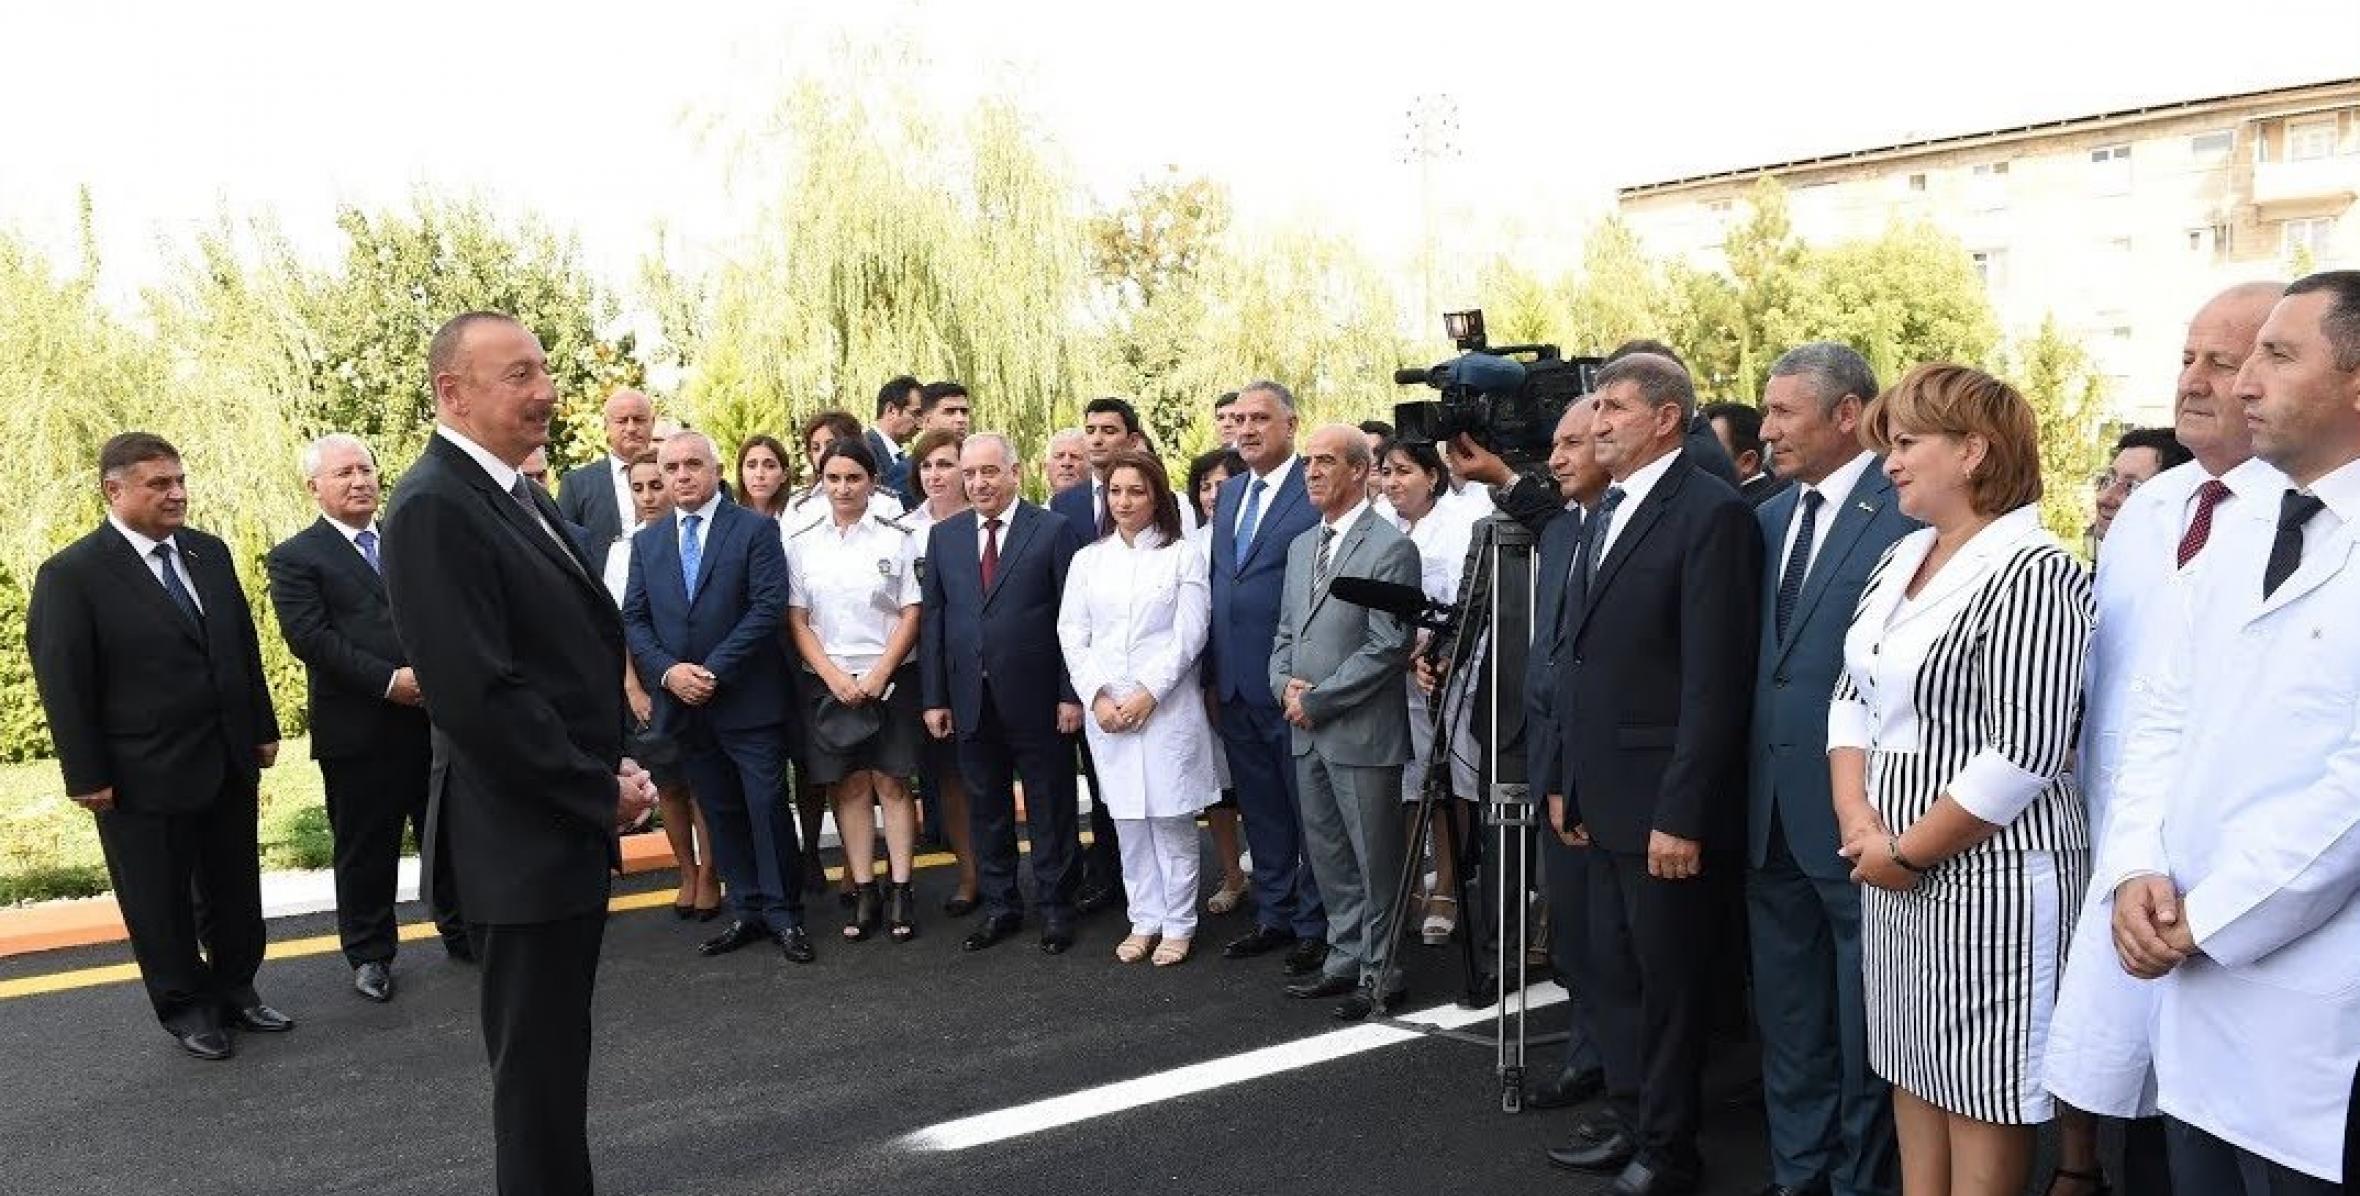 Speech by Ilham Aliyev at the meeting with representatives of the general public in Goygol